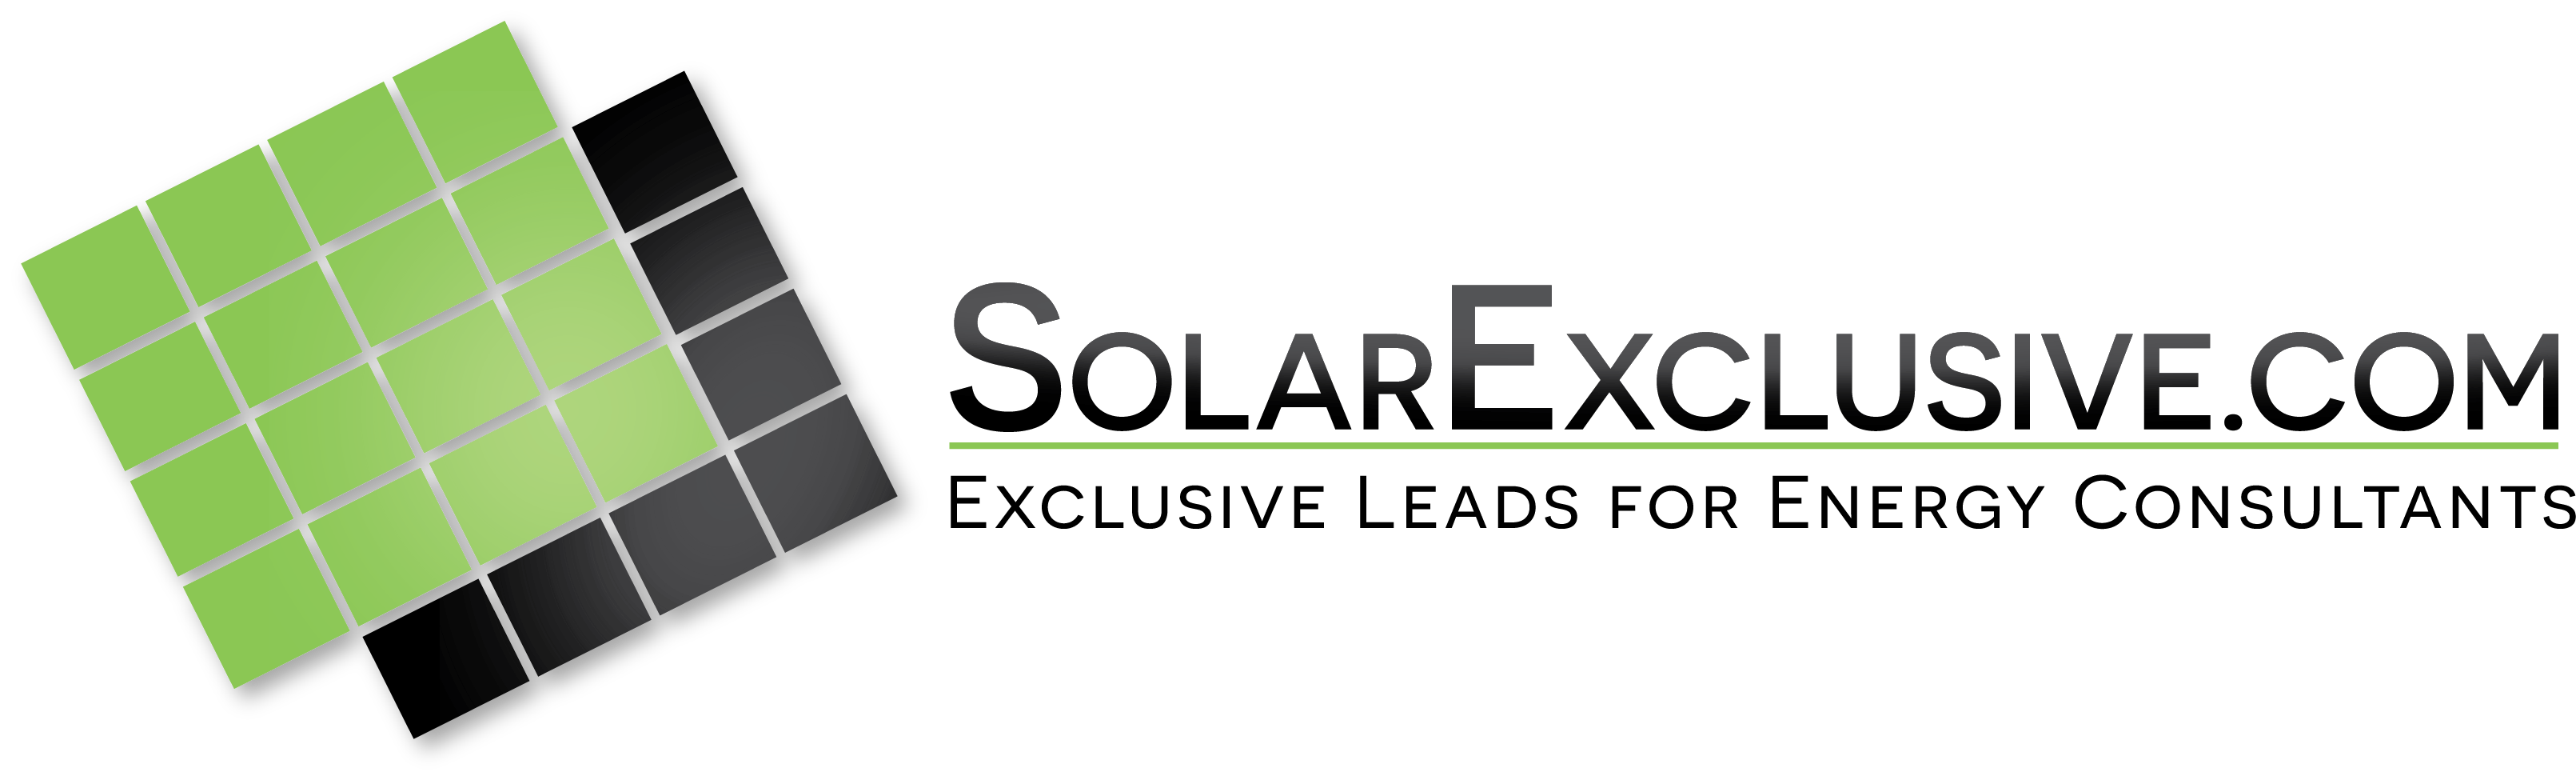 Solar Exclusive Announces its Most Exclusive Offer to Clients Yet: Free Call Center Services